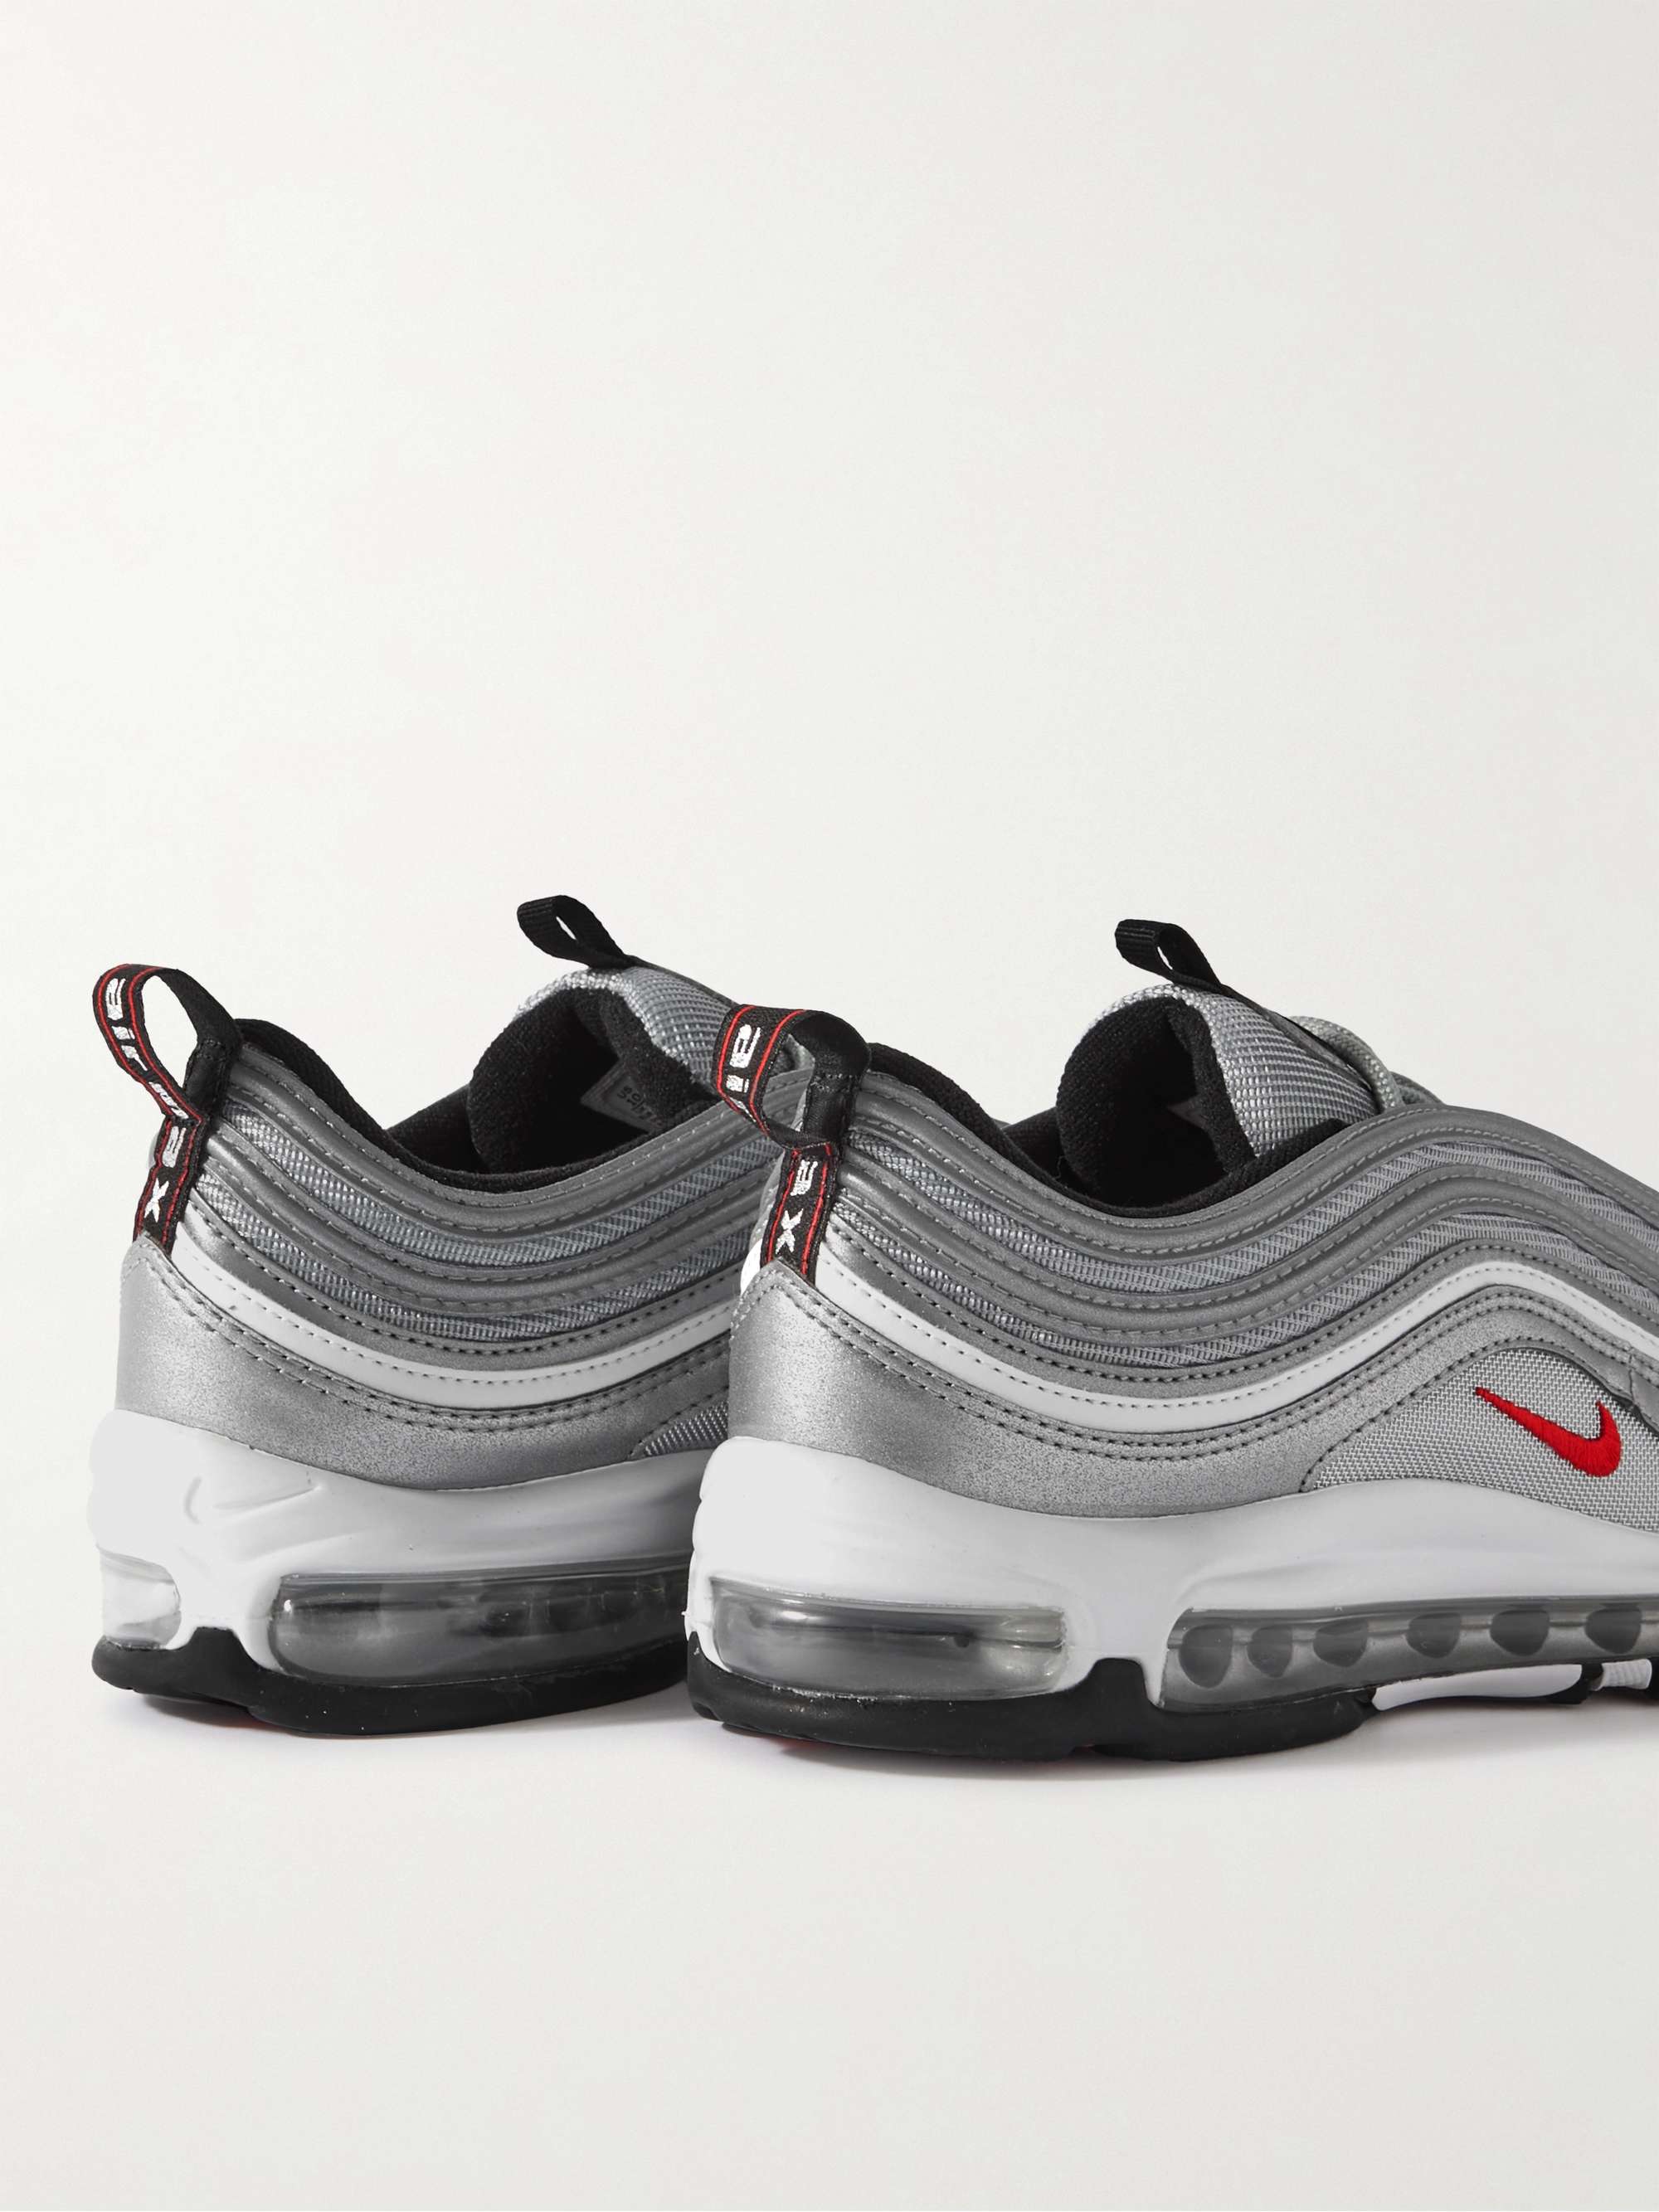 tarief Systematisch tank NIKE Air Max 97 Metallic Leather and Mesh Sneakers | MR PORTER